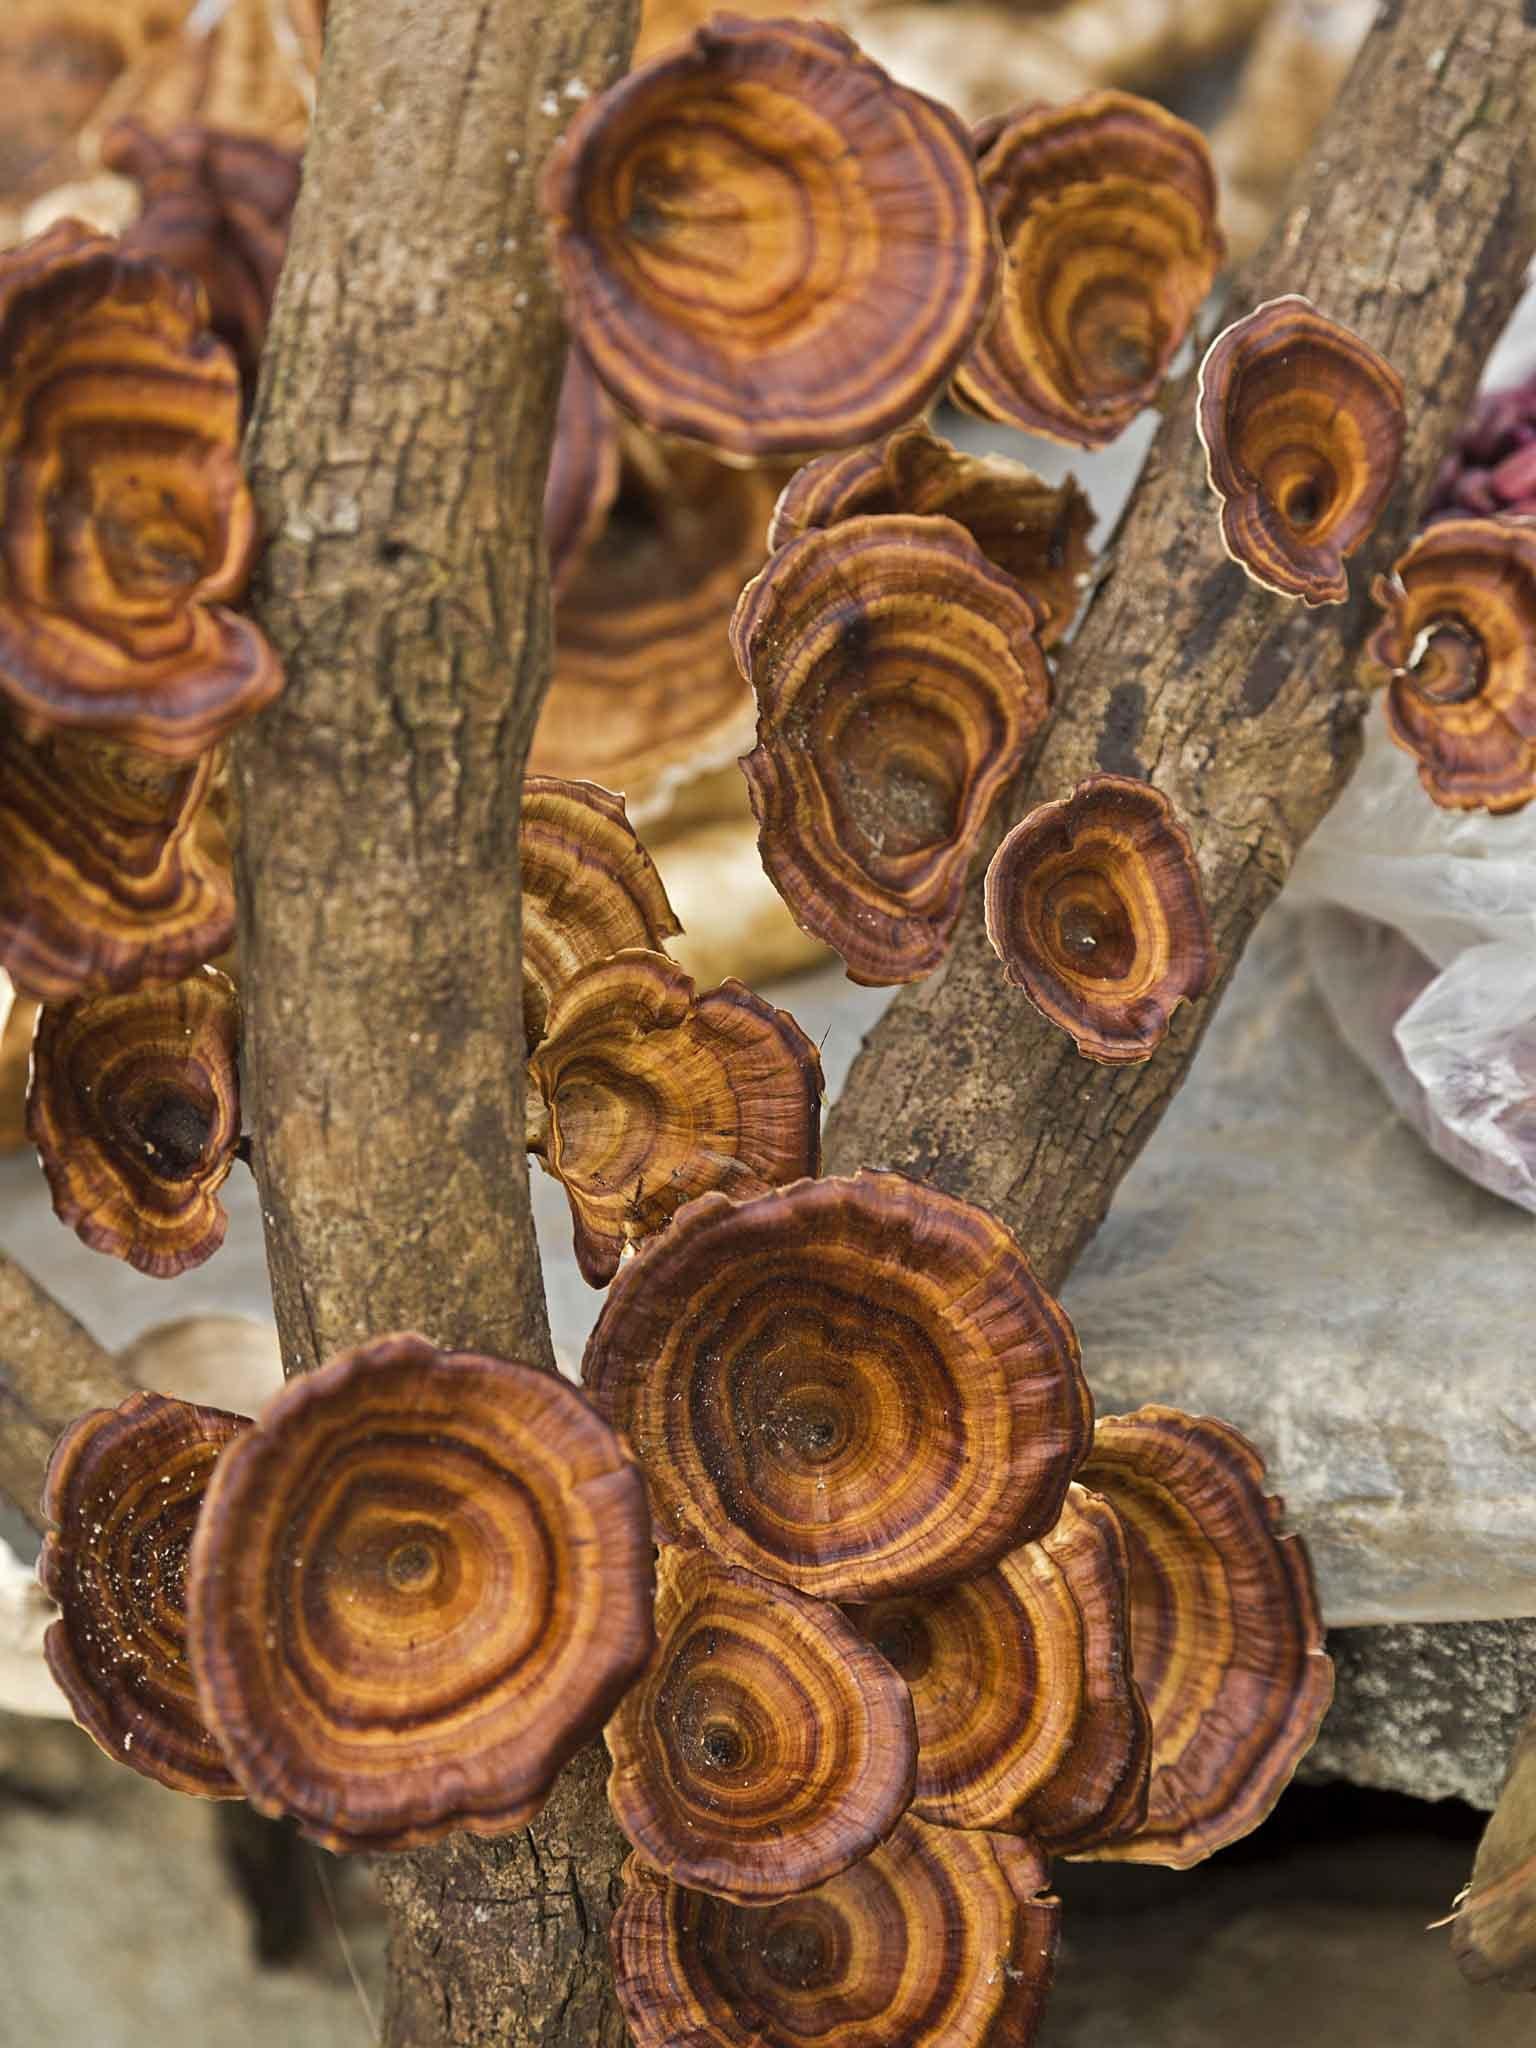 Reishi is known to treat anxiety and insomnia